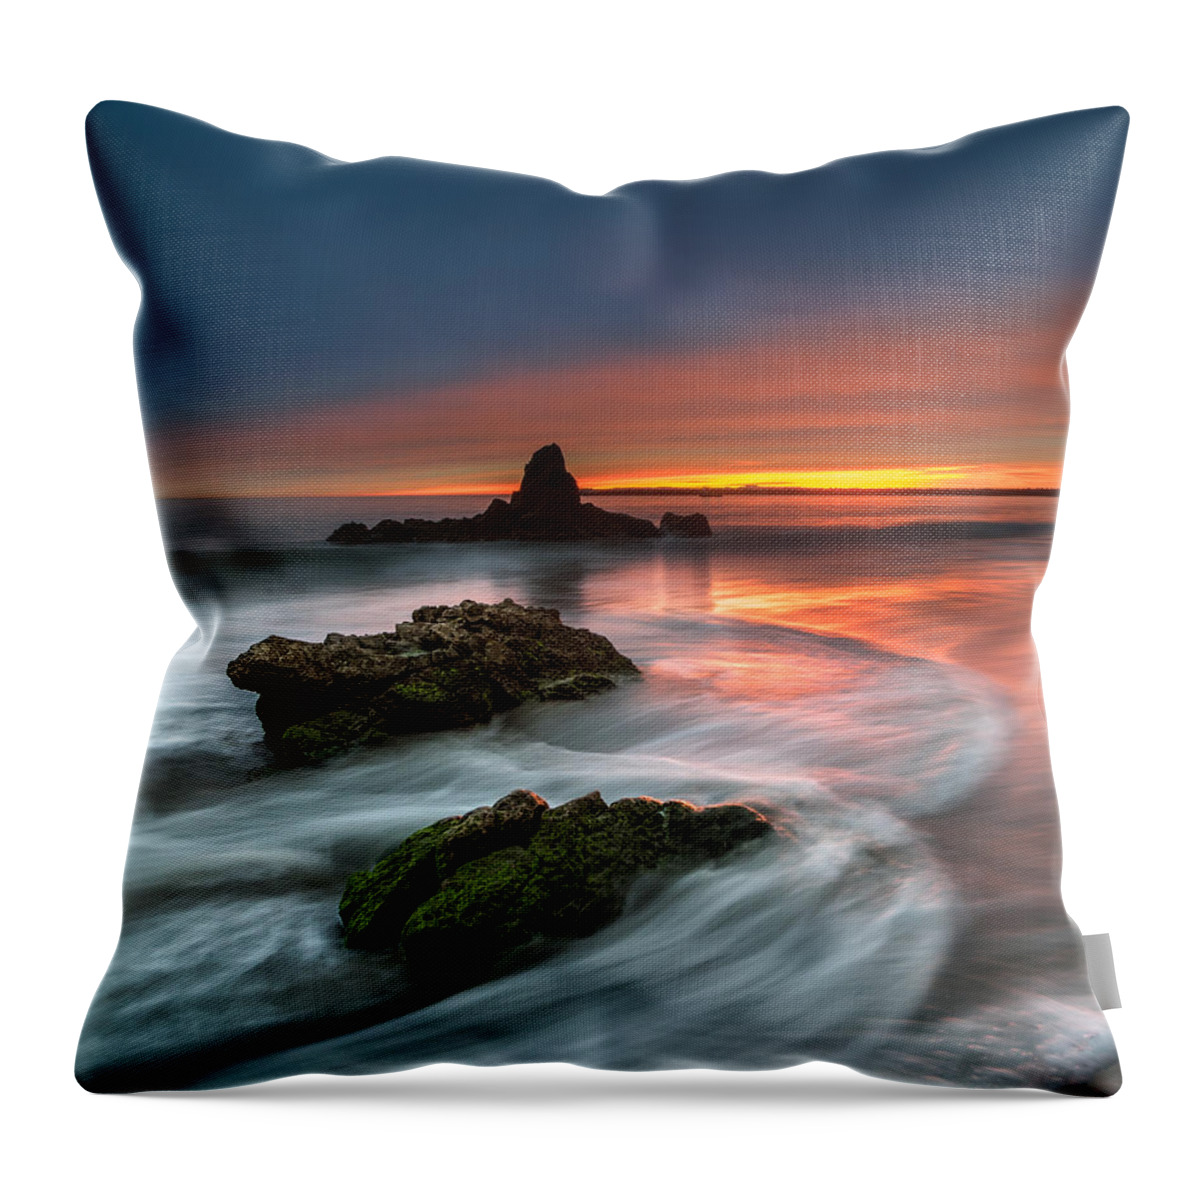 California Throw Pillow featuring the photograph Mystical Sunset 2 by Larry Marshall